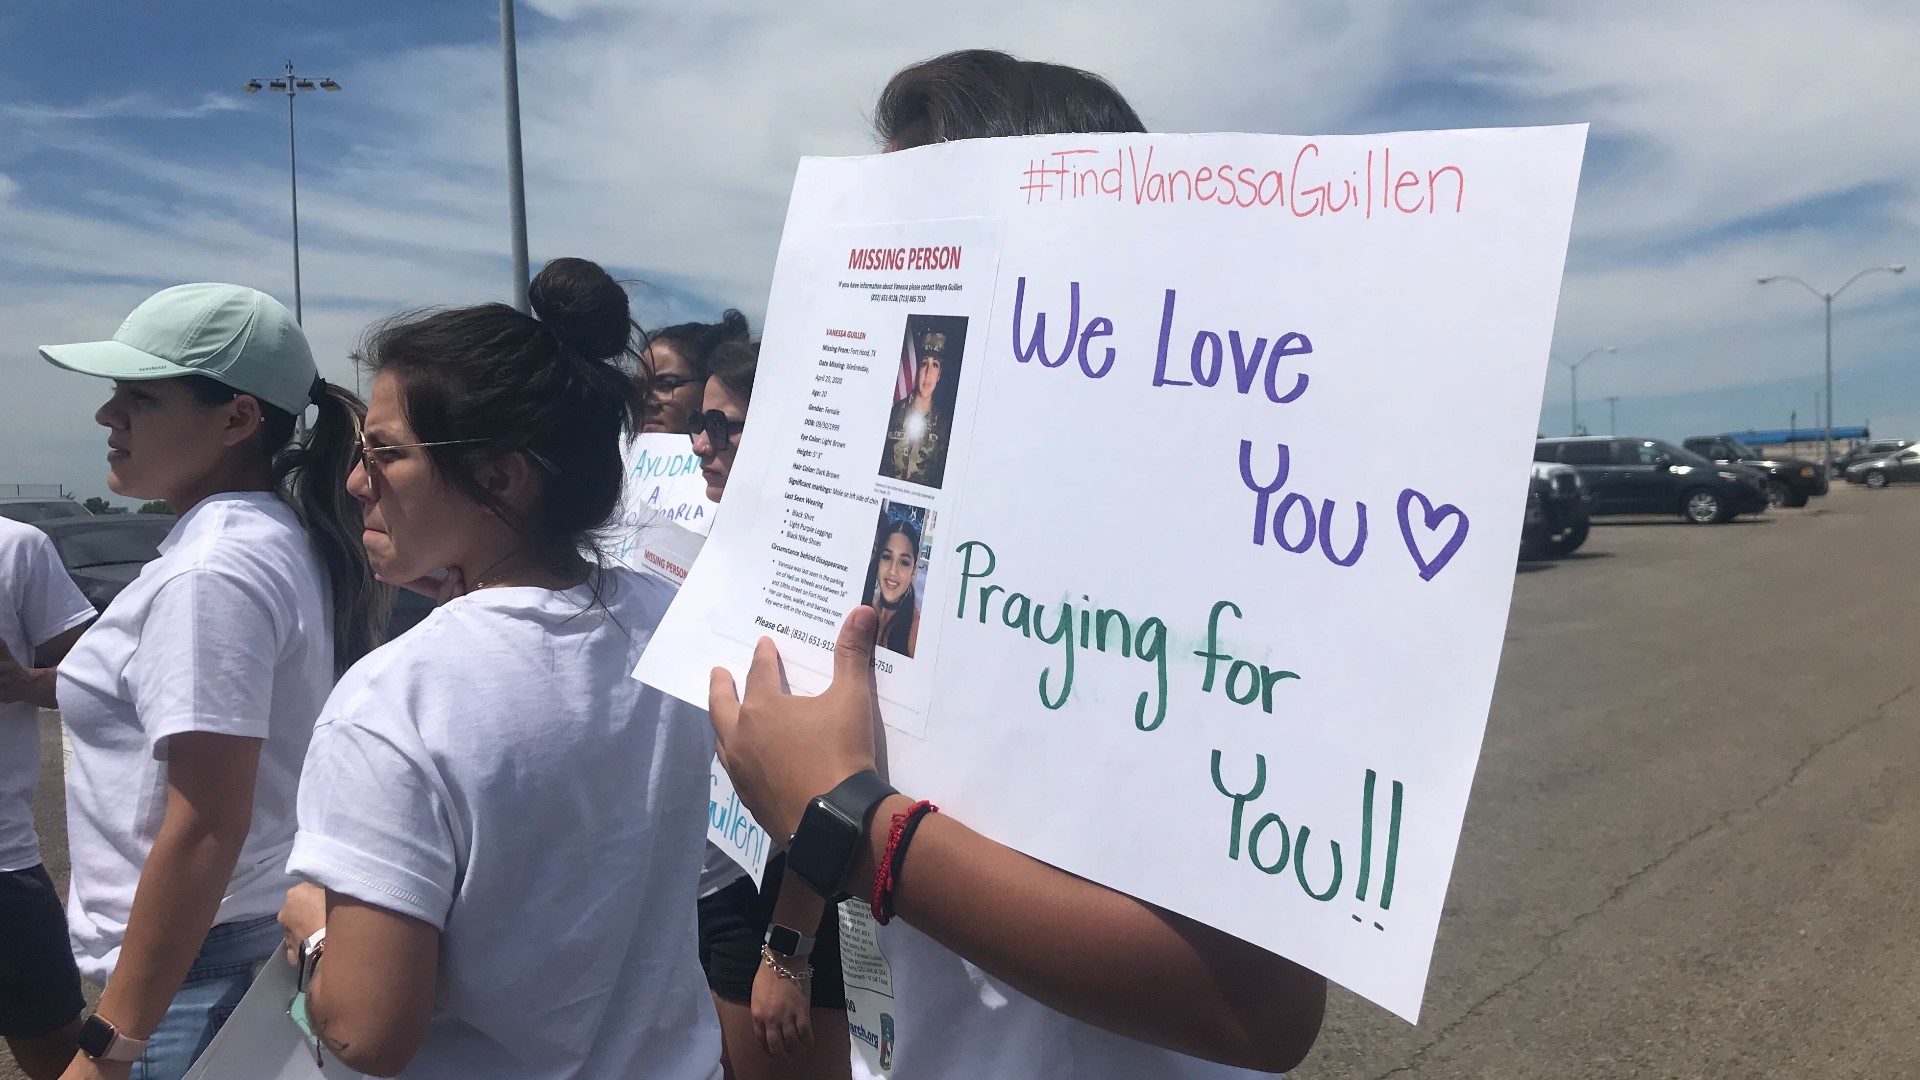 Twenty family and friends of PFC Vanessa Guillen rallied in Killeen hoping to raise public awareness about her disappearance.